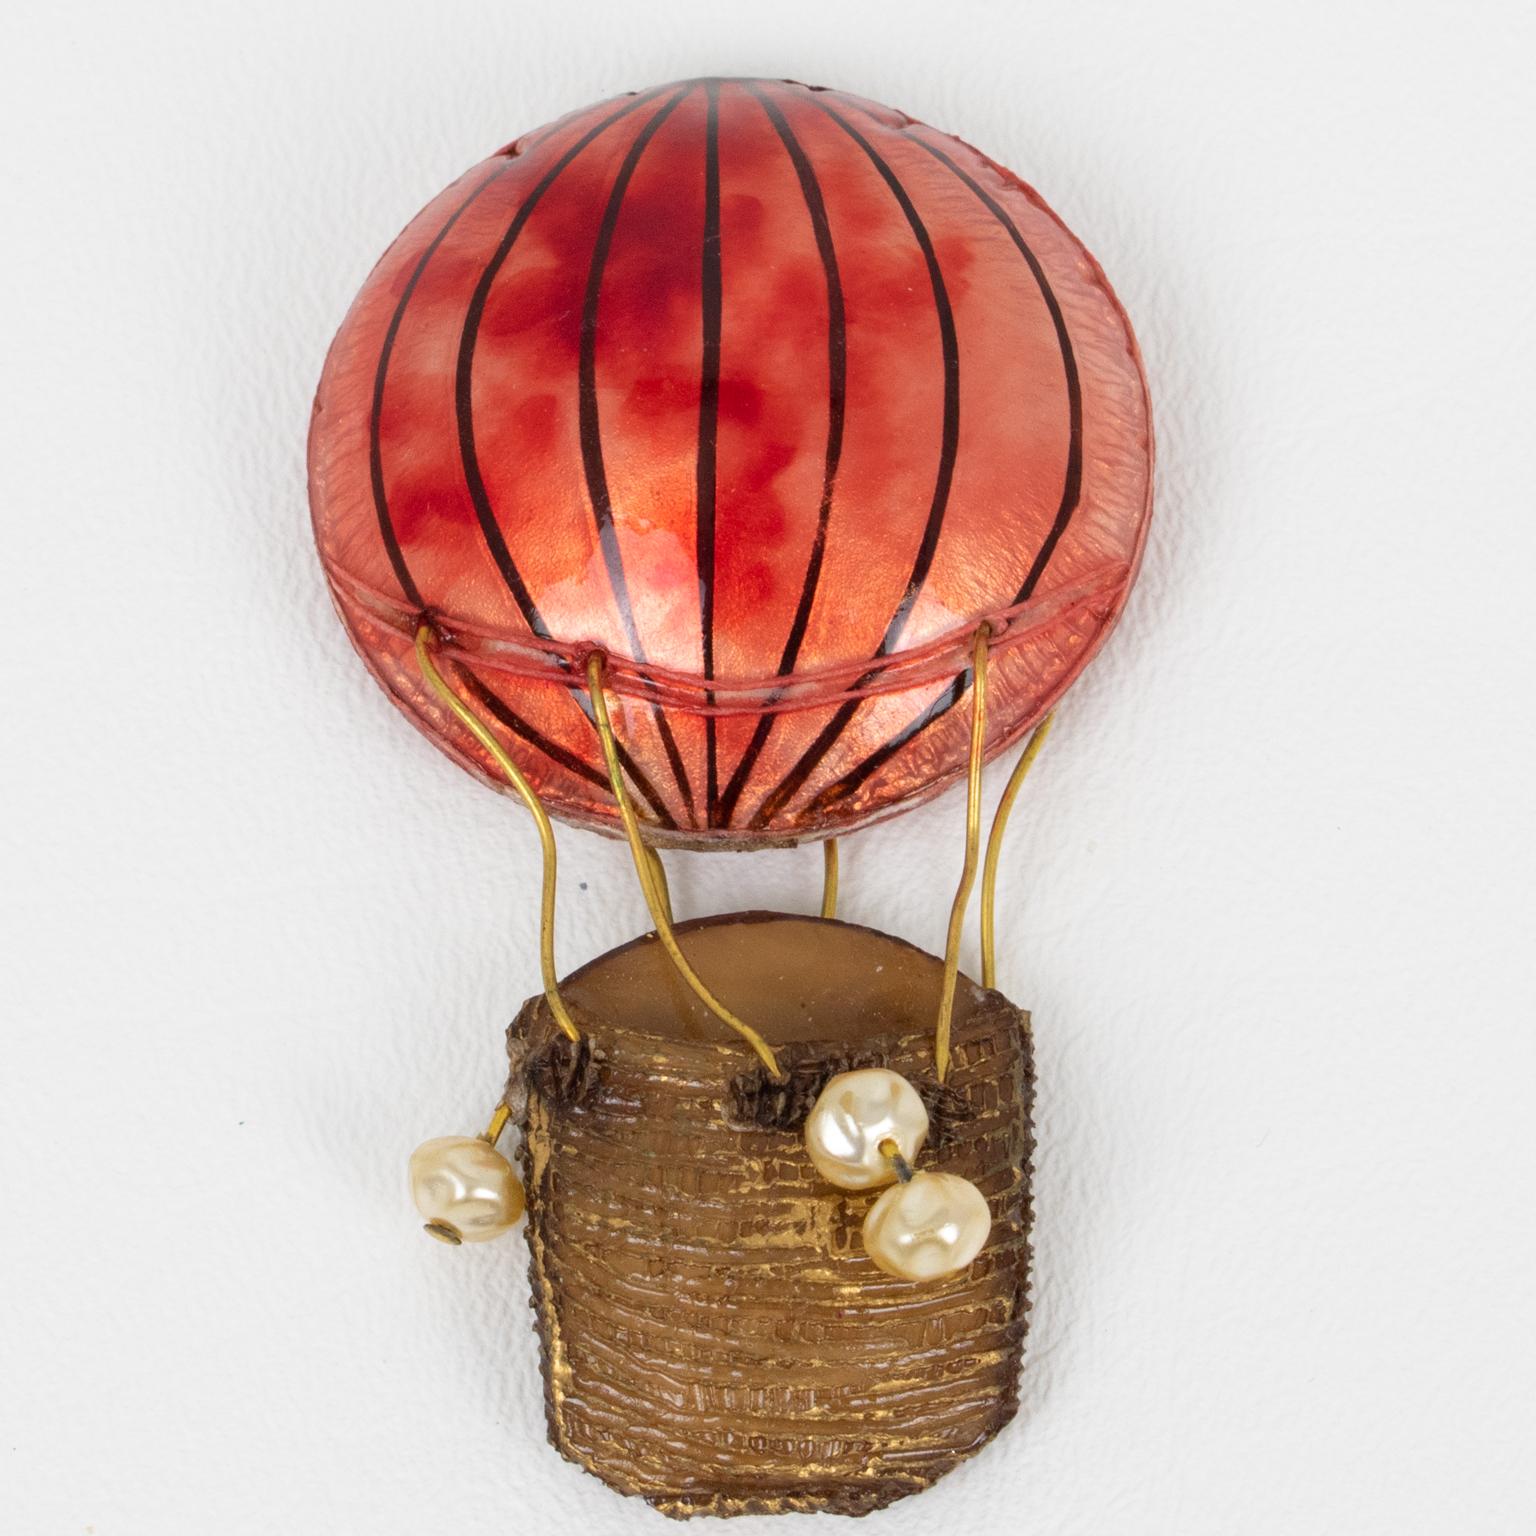 Modern Cilea Paris Resin Pin Brooch Playful Red and Brown Hot Air Balloon For Sale